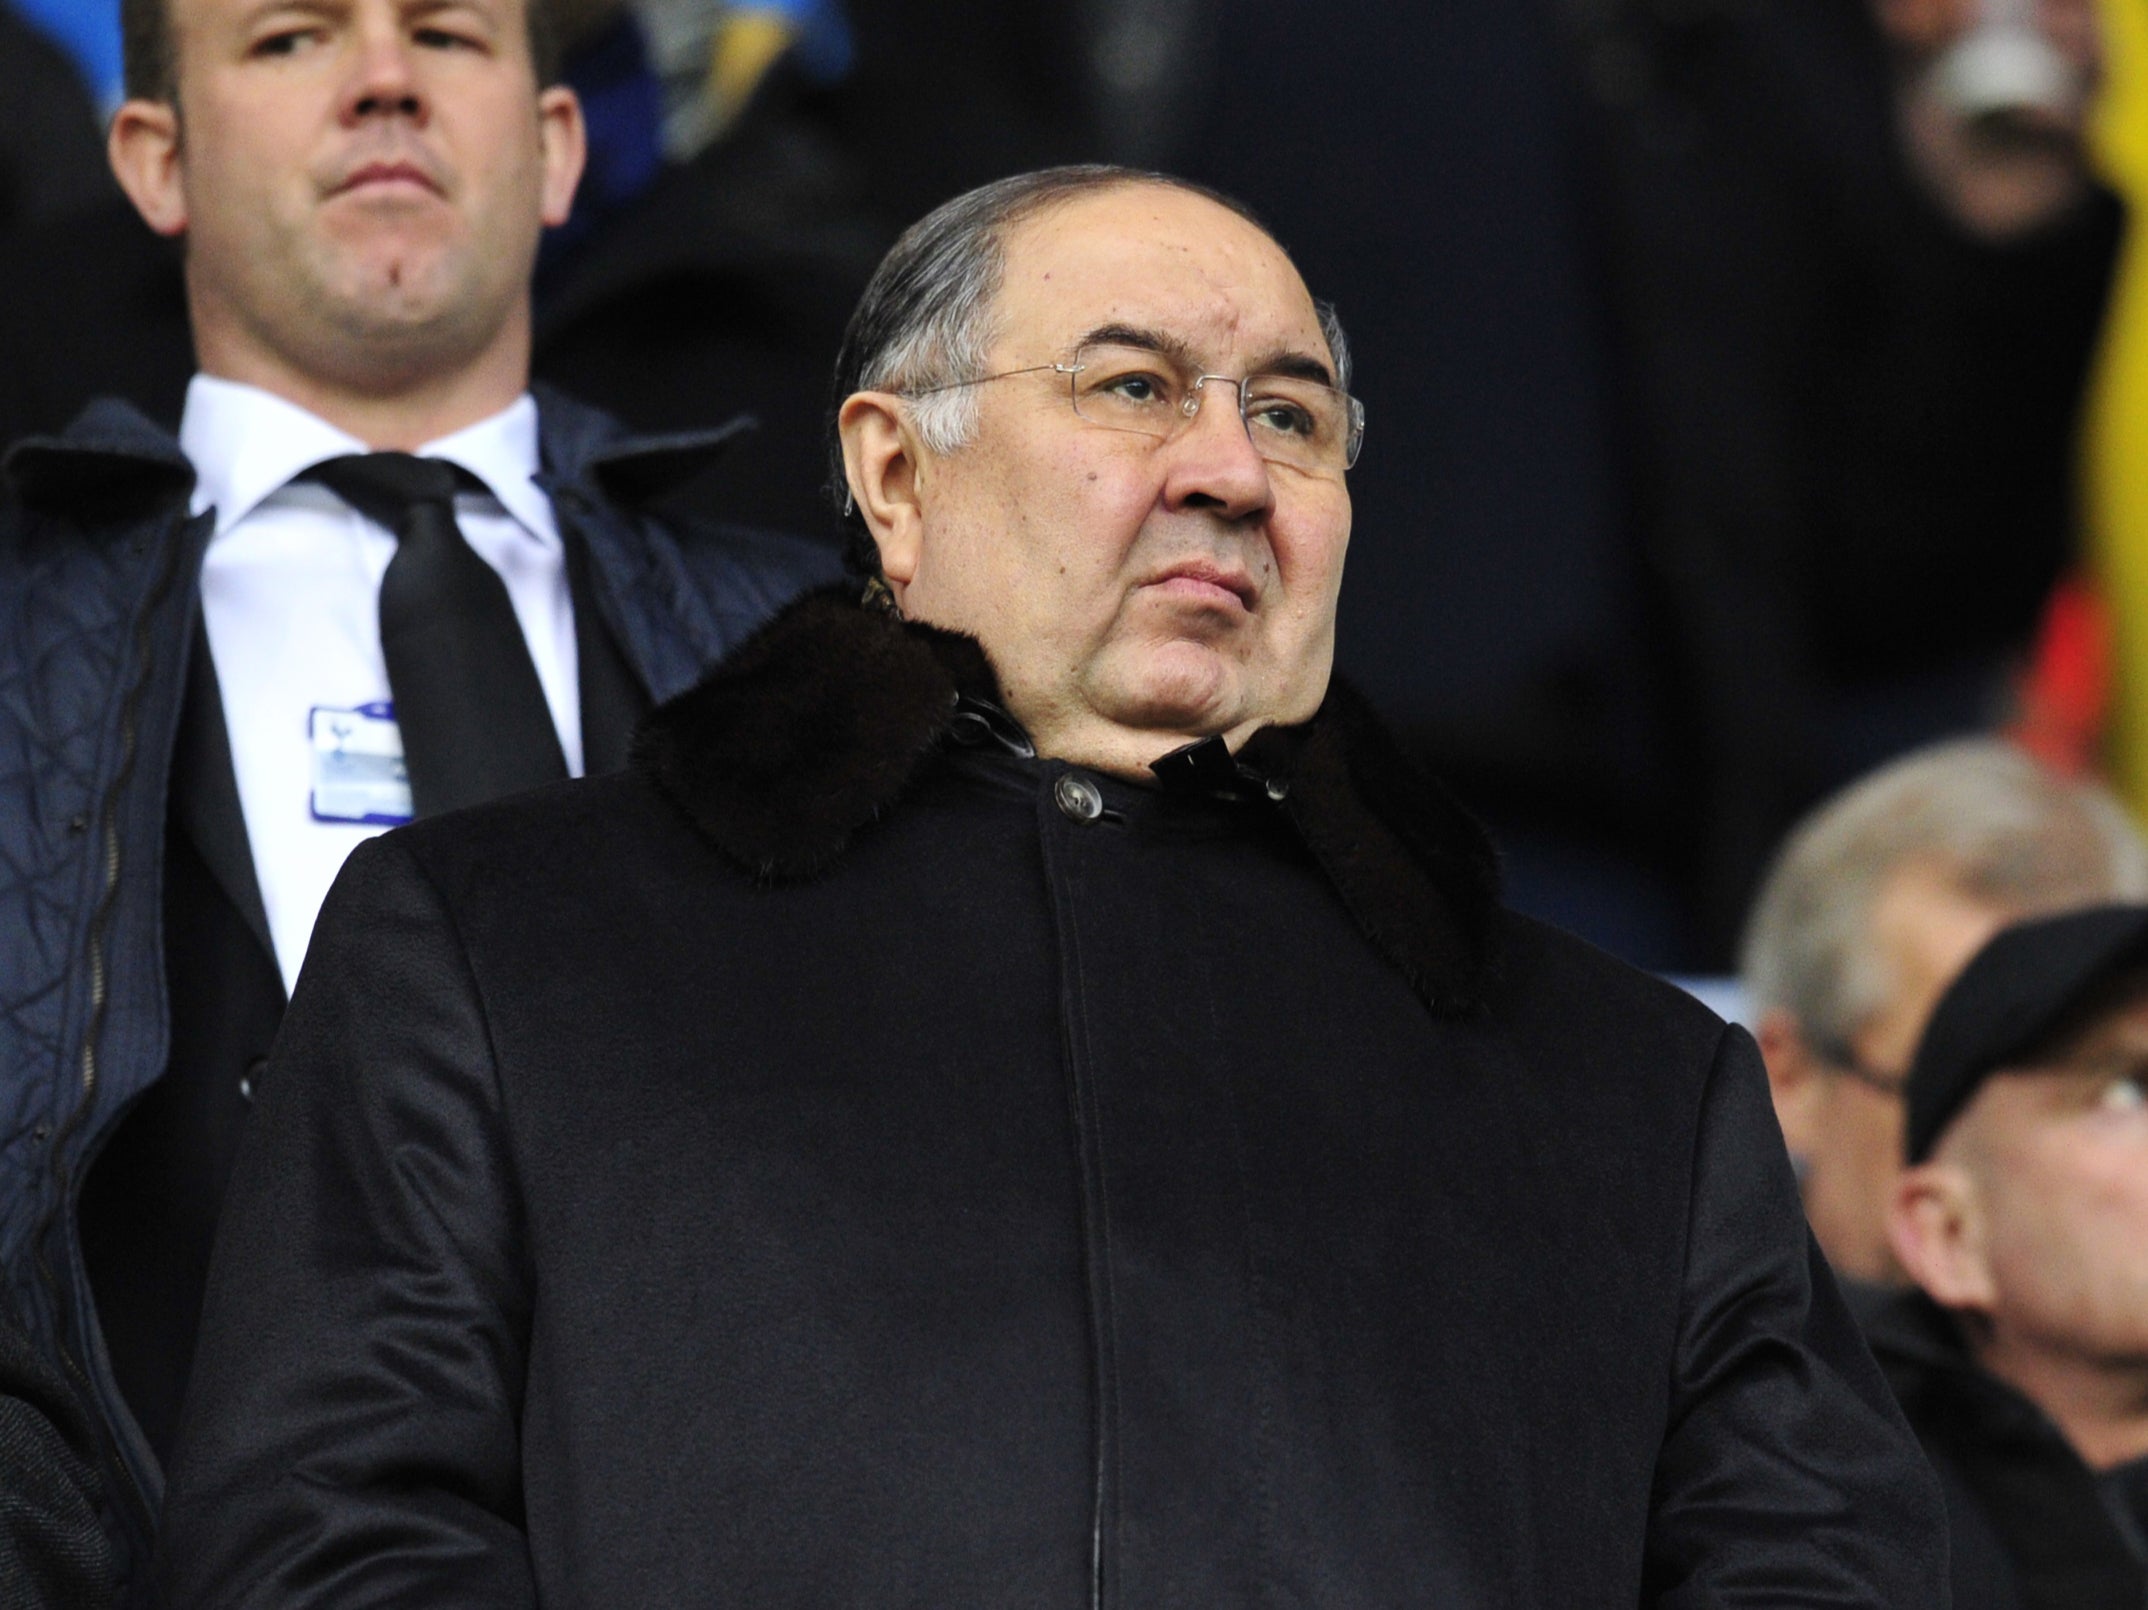 Billionaire Alisher Usmanov has had his assets frozen by the EU